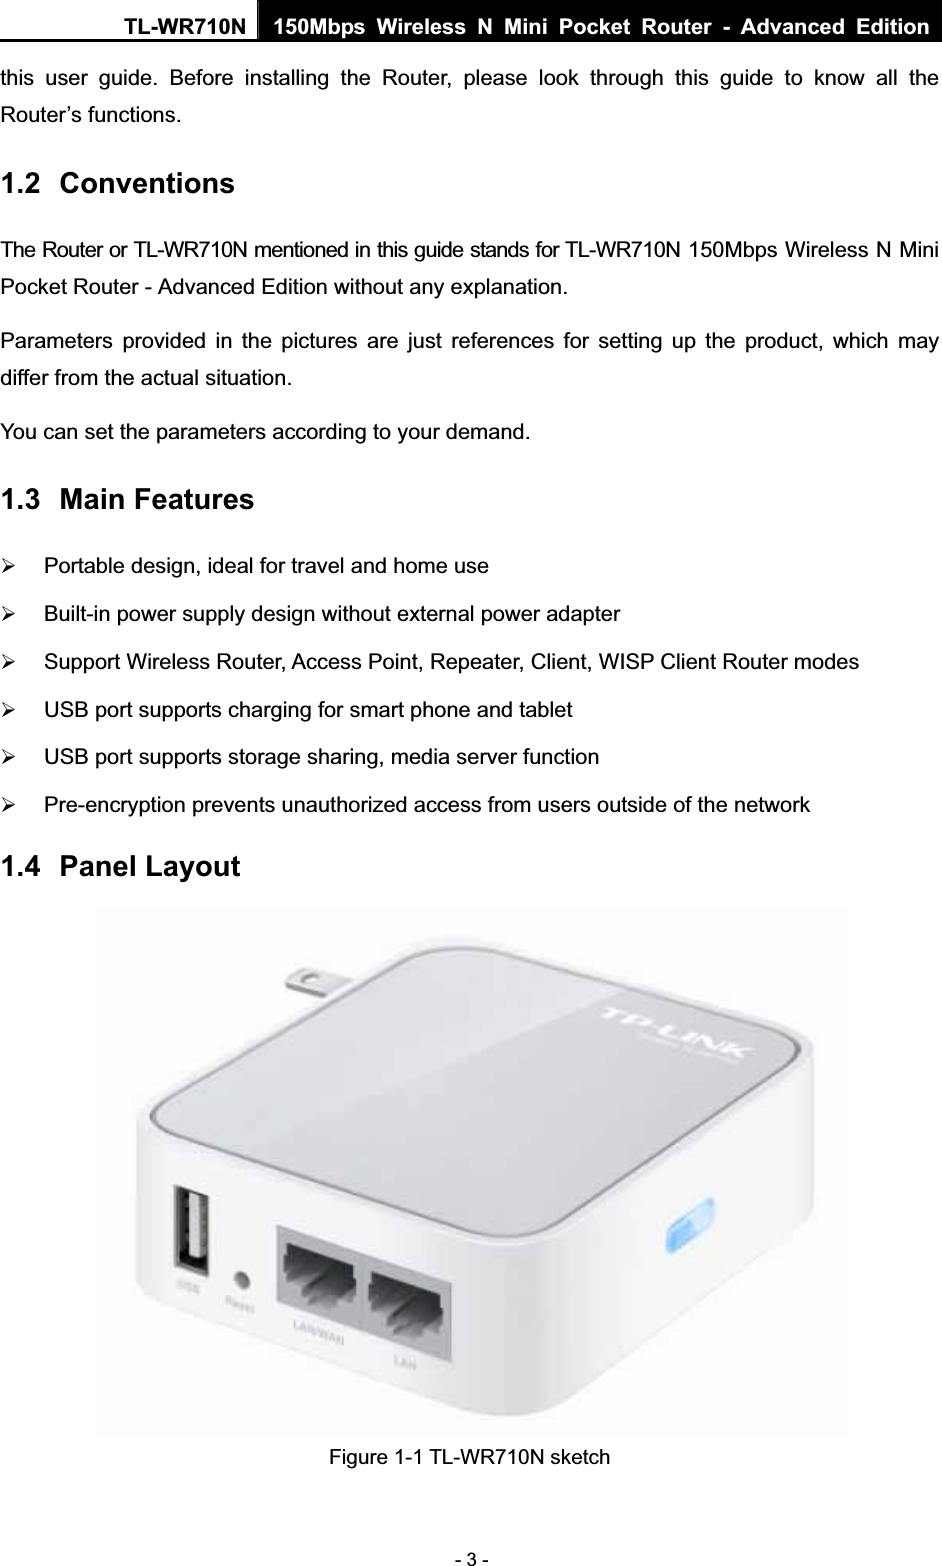 TL-WR710N  150Mbps Wireless N Mini Pocket Router - Advanced Edition- 3 - this user guide. Before installing the Router, please look through this guide to know all the Router’s functions. 1.2 ConventionsThe Router or TL-WR710N mentioned in this guide stands for TL-WR710N 150Mbps Wireless N Mini Pocket Router - Advanced Edition without any explanation. Parameters provided in the pictures are just references for setting up the product, which may differ from the actual situation. You can set the parameters according to your demand. 1.3 Main Features ¾Portable design, ideal for travel and home use ¾Built-in power supply design without external power adapter ¾Support Wireless Router, Access Point, Repeater, Client, WISP Client Router modes ¾USB port supports charging for smart phone and tablet ¾USB port supports storage sharing, media server function ¾Pre-encryption prevents unauthorized access from users outside of the network 1.4 Panel Layout Figure 1-1 TL-WR710N sketch 